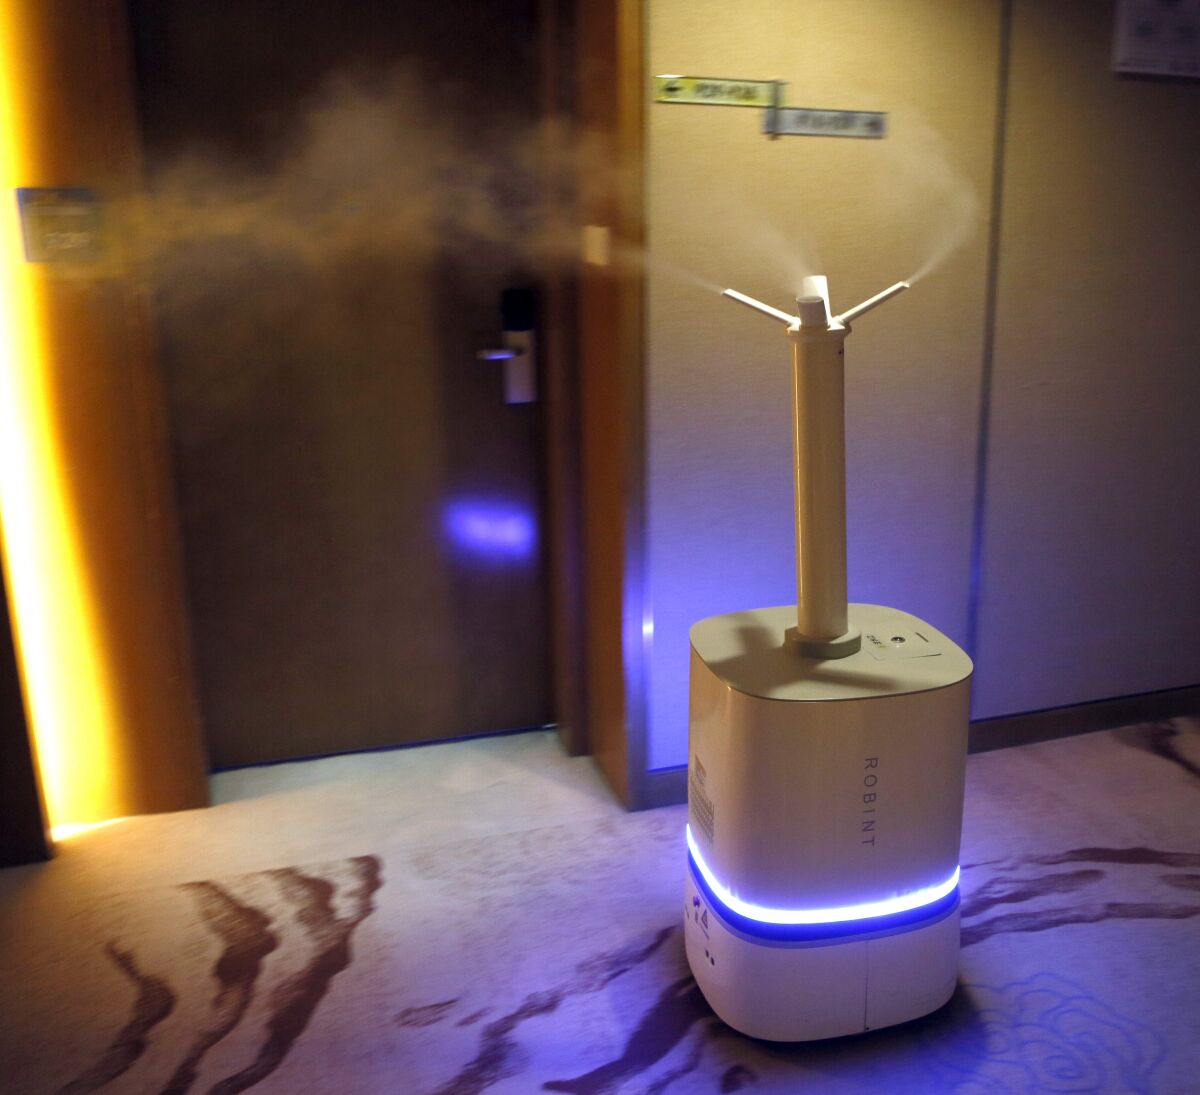 Robot sprays disinfectant in a hallway of the Crown Plaza hotel in Beijing.